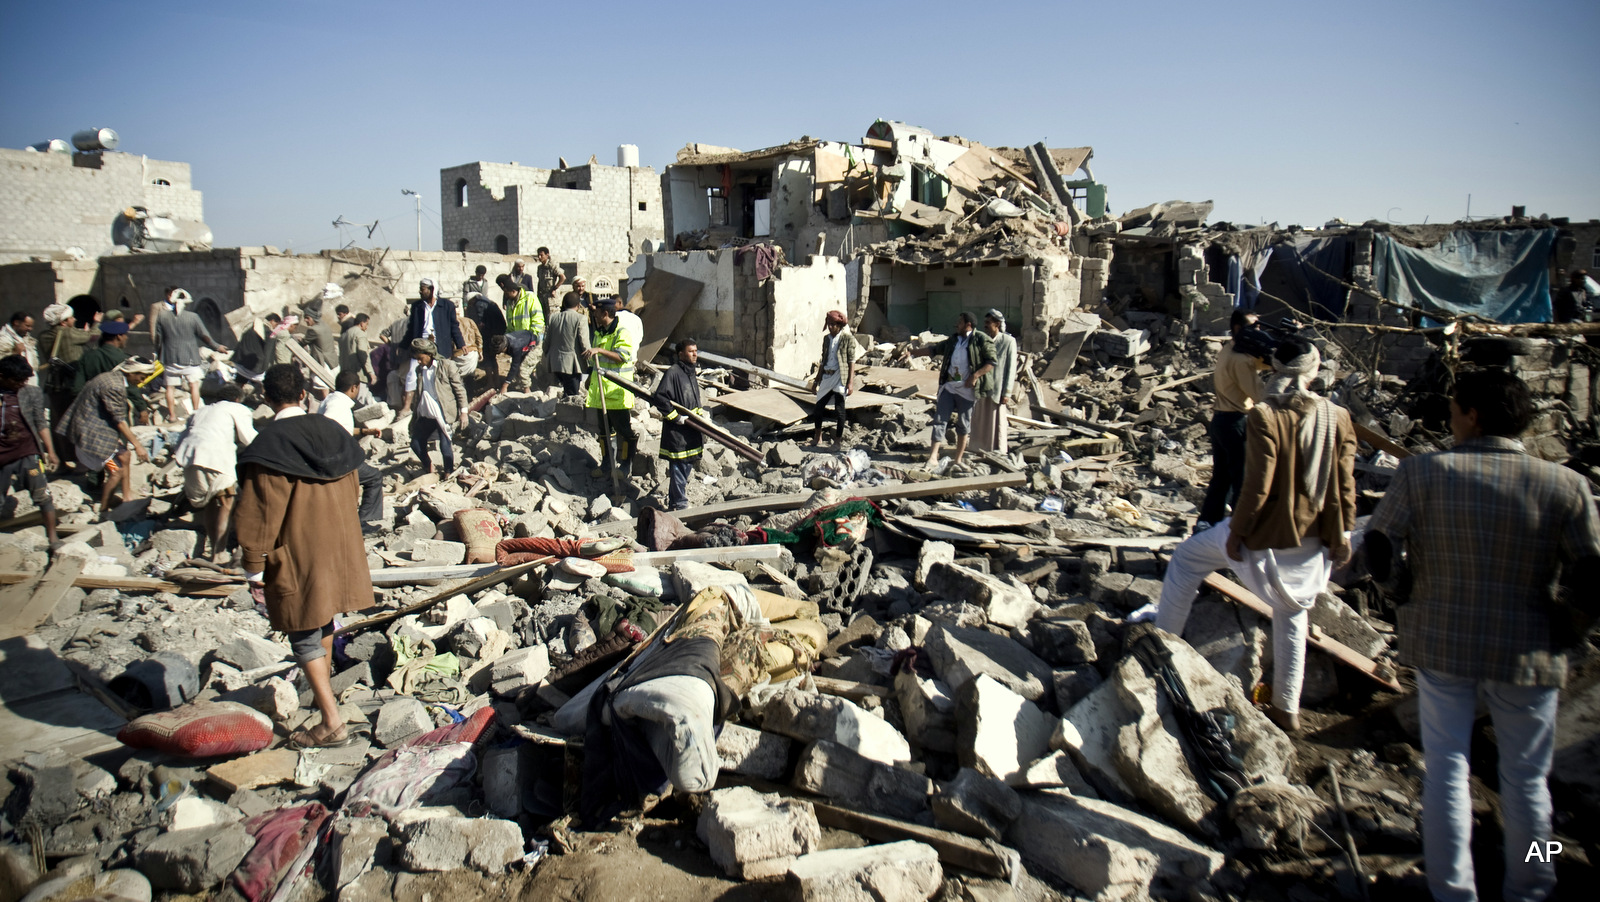 Yemenis stand amid the rubble of houses destroyed by Saudi-led air strikes in a village near Sana’a. Photograph: Hani Mohammed/AP